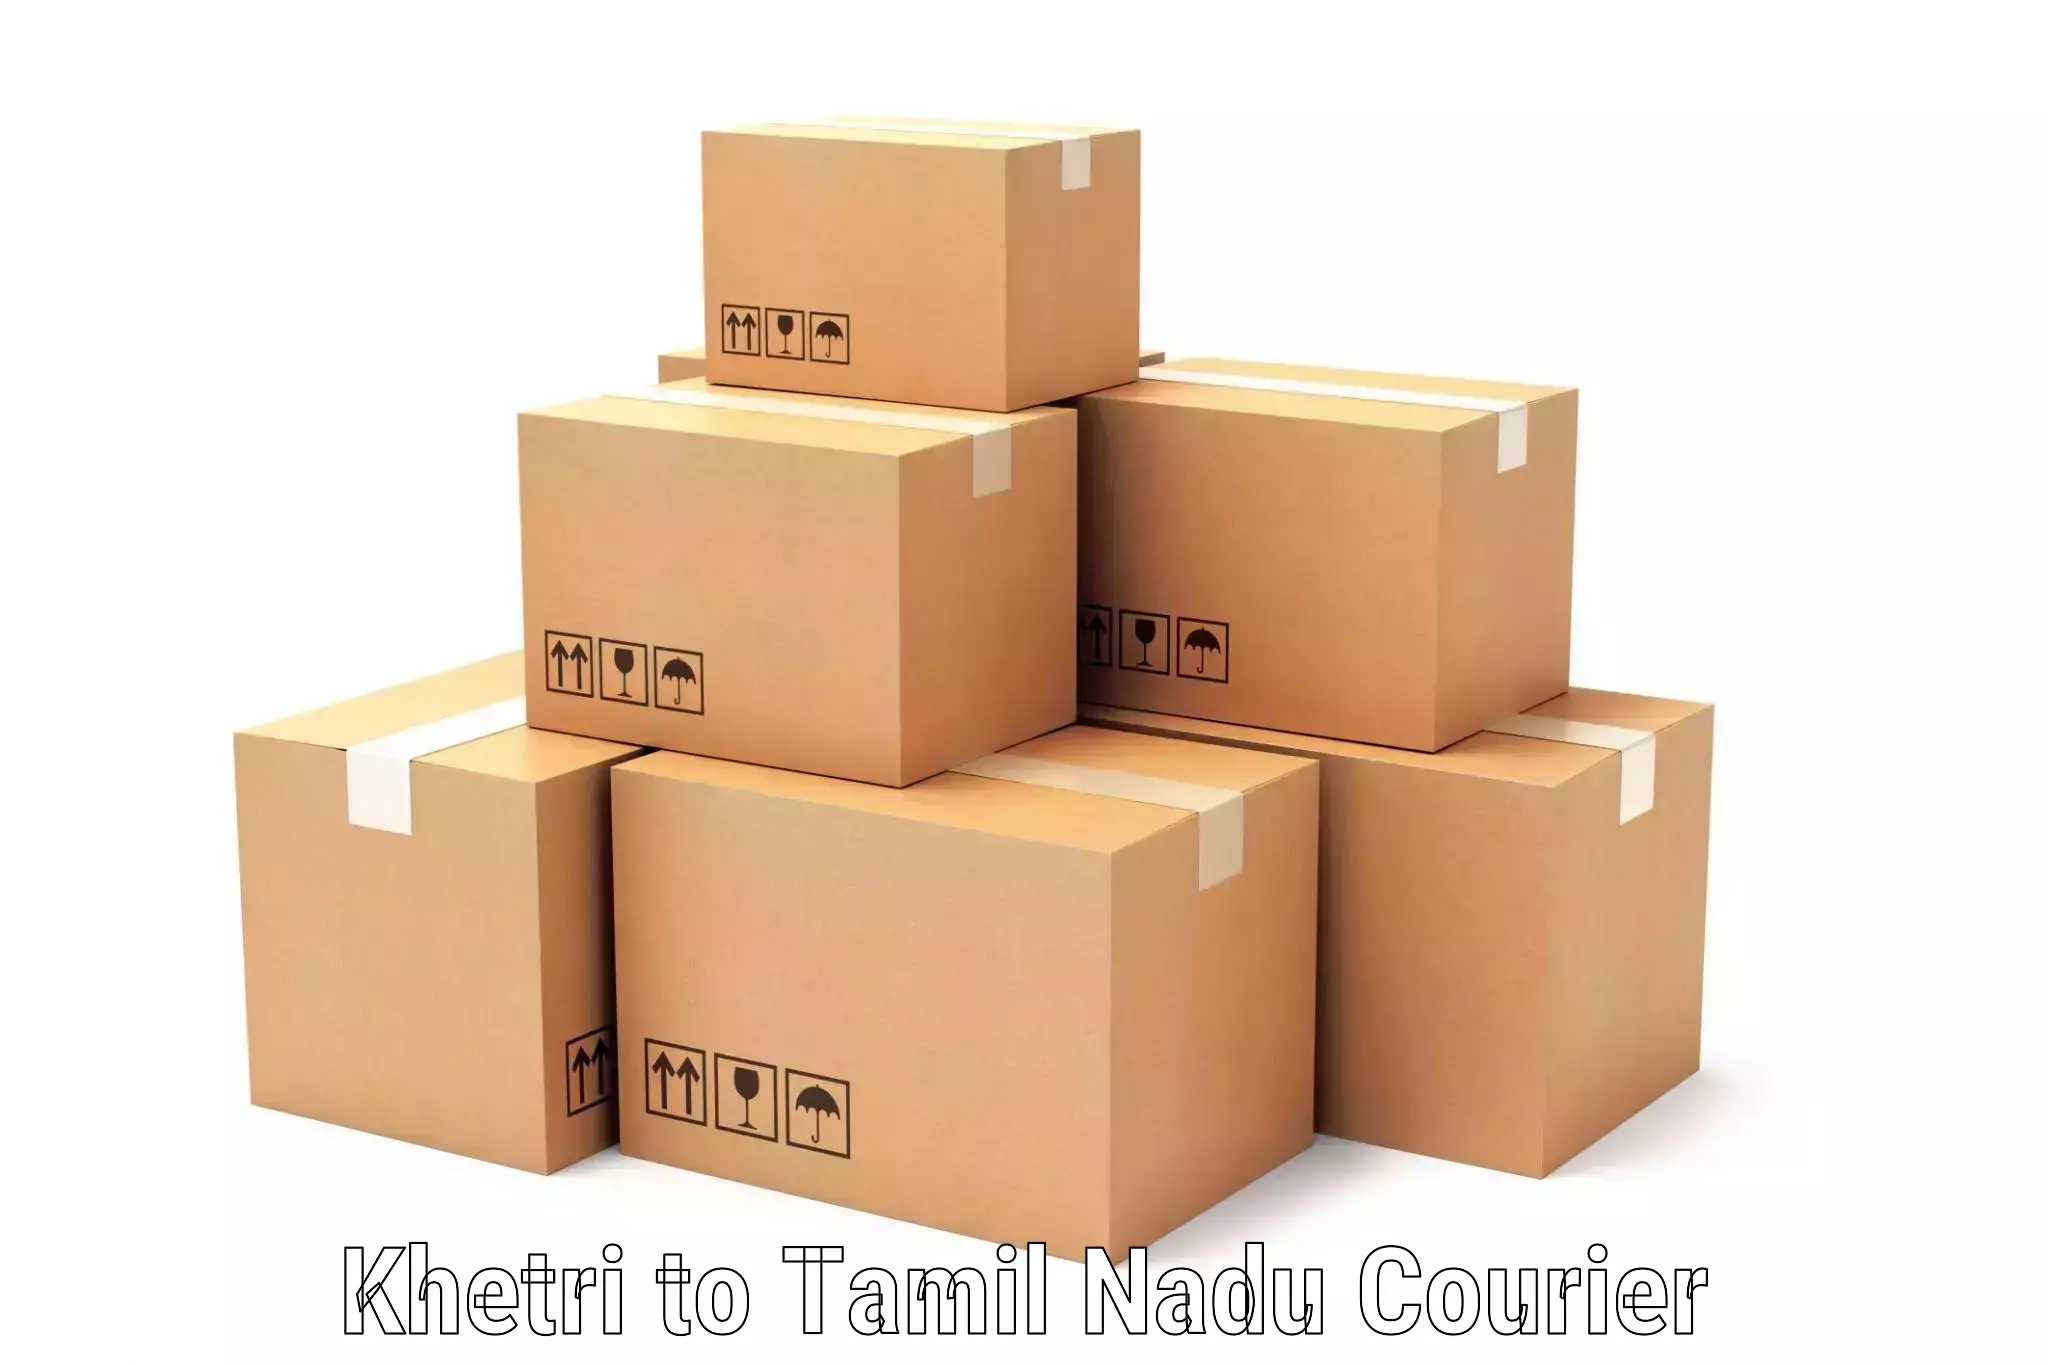 Nationwide shipping coverage Khetri to Vriddhachalam